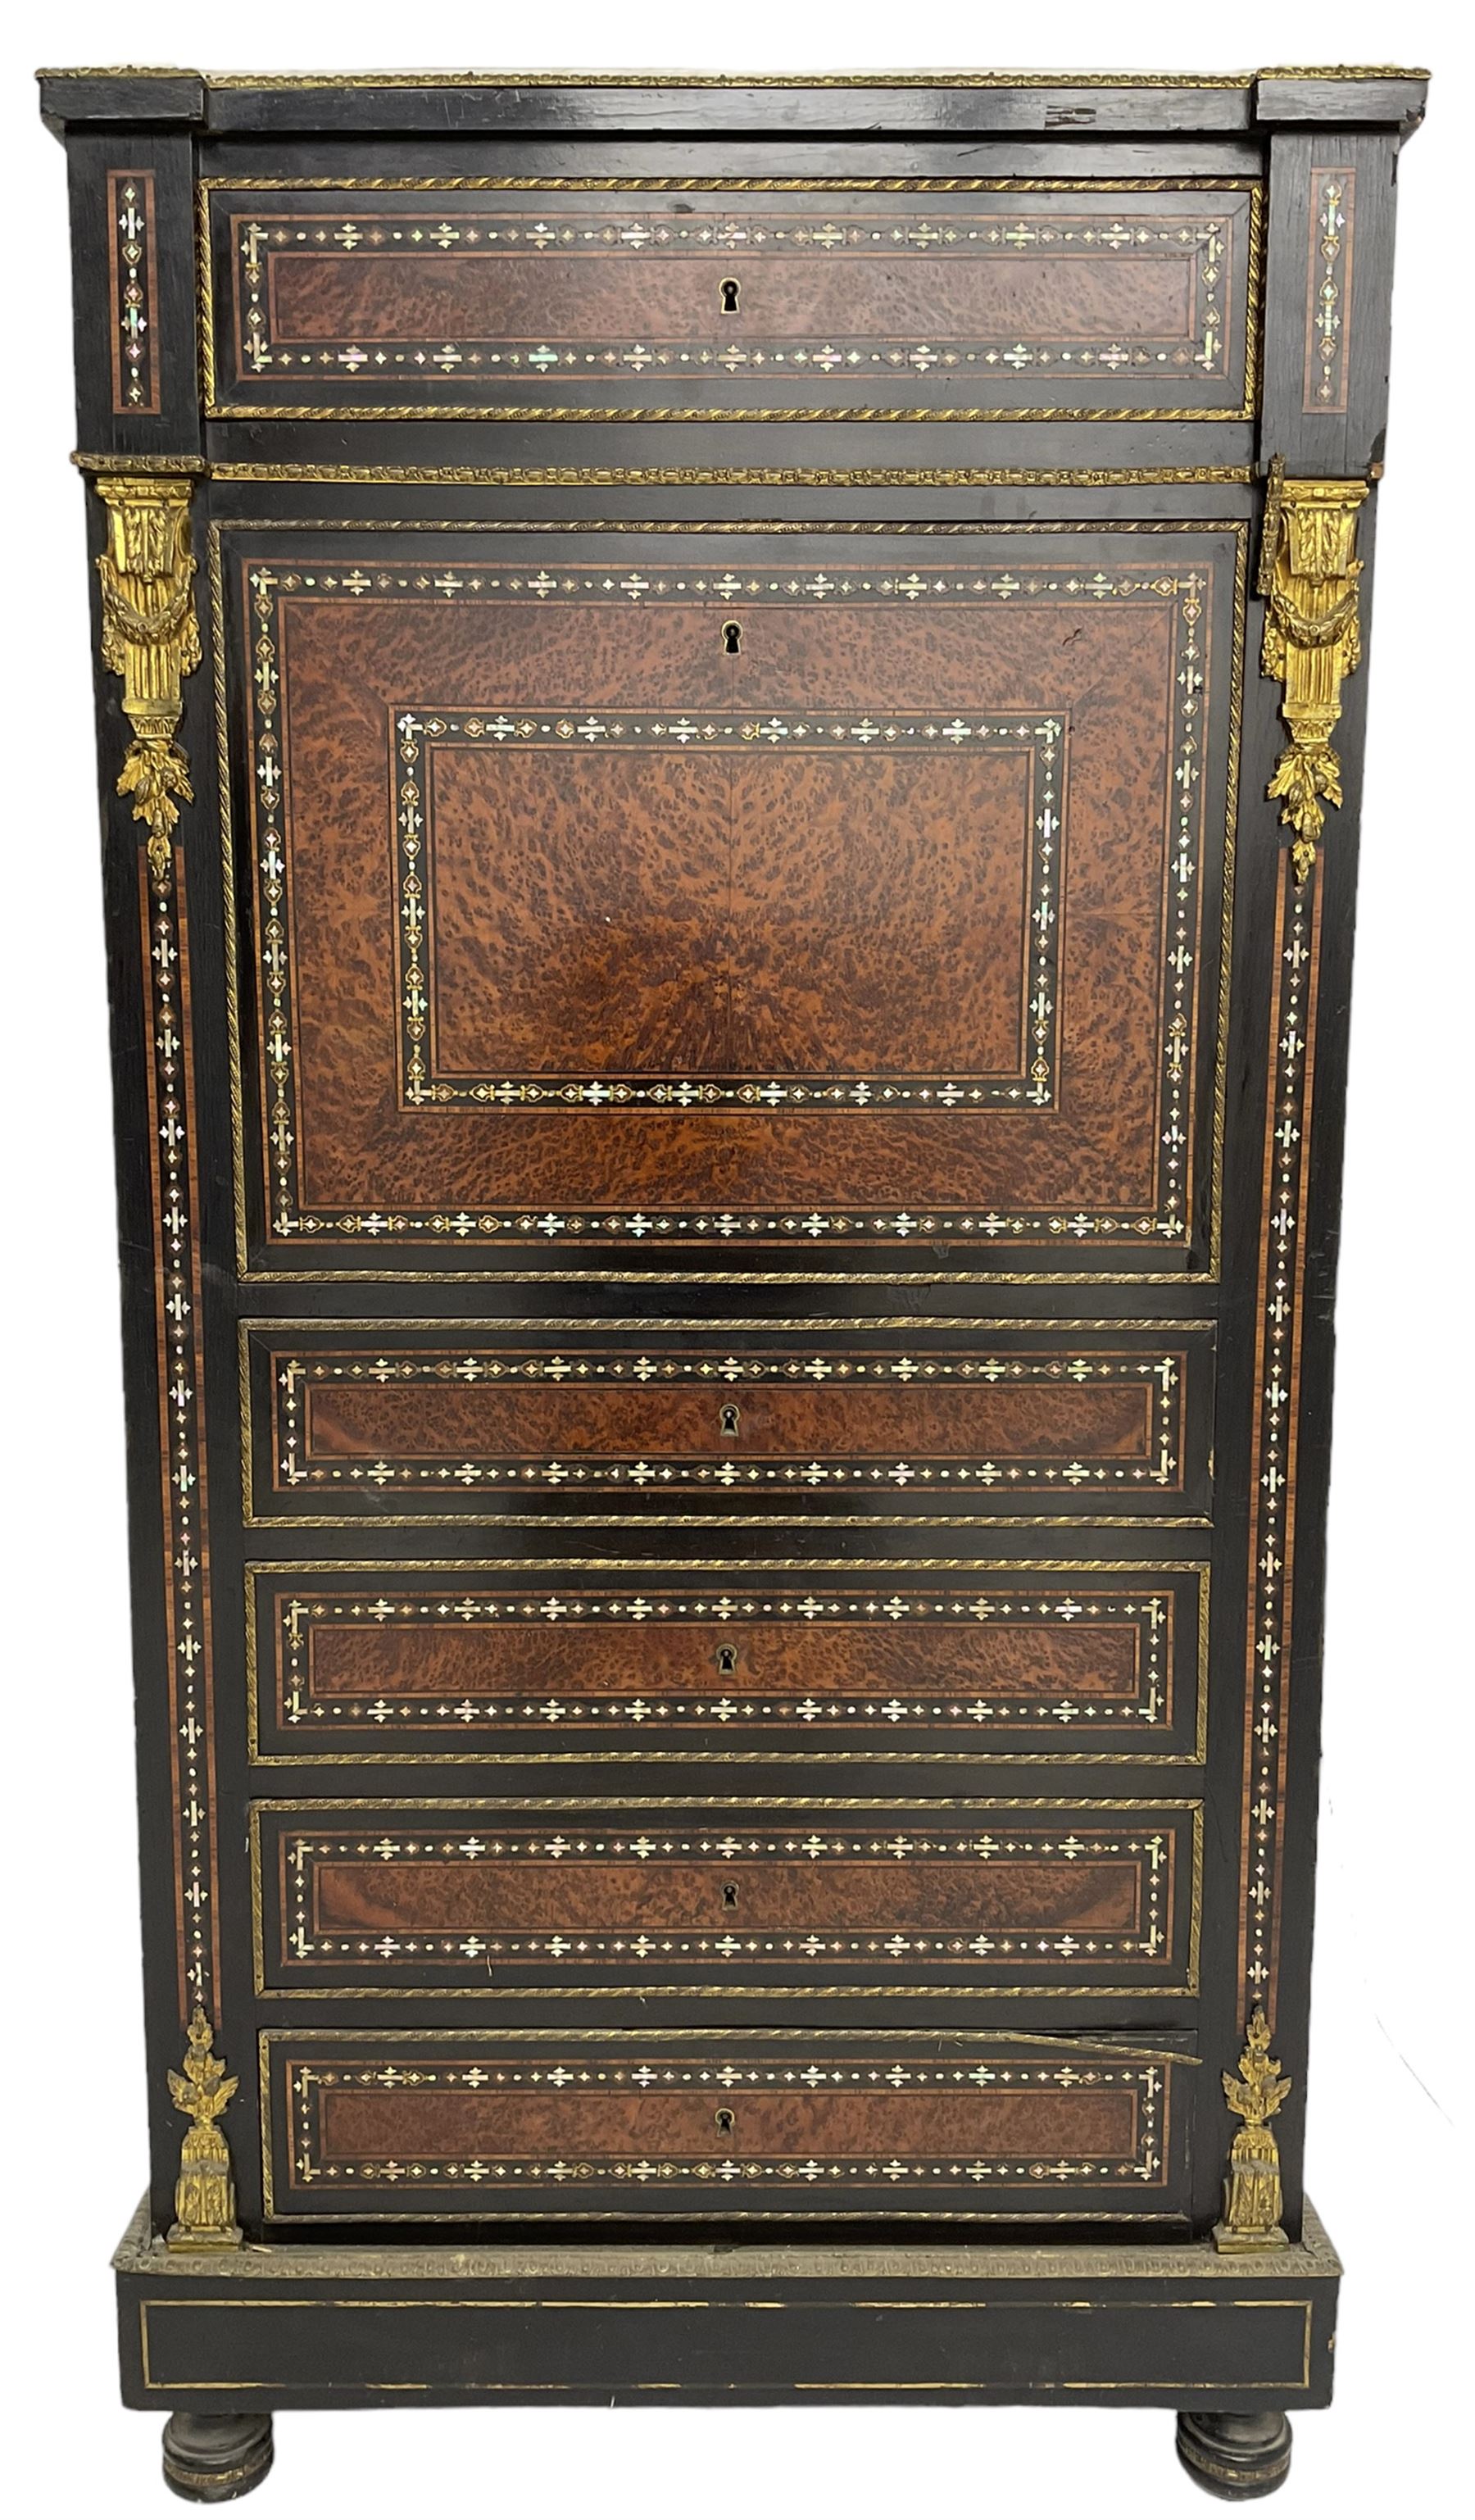 Late 19th century French ebonised and amboyna secrétaire à abattant